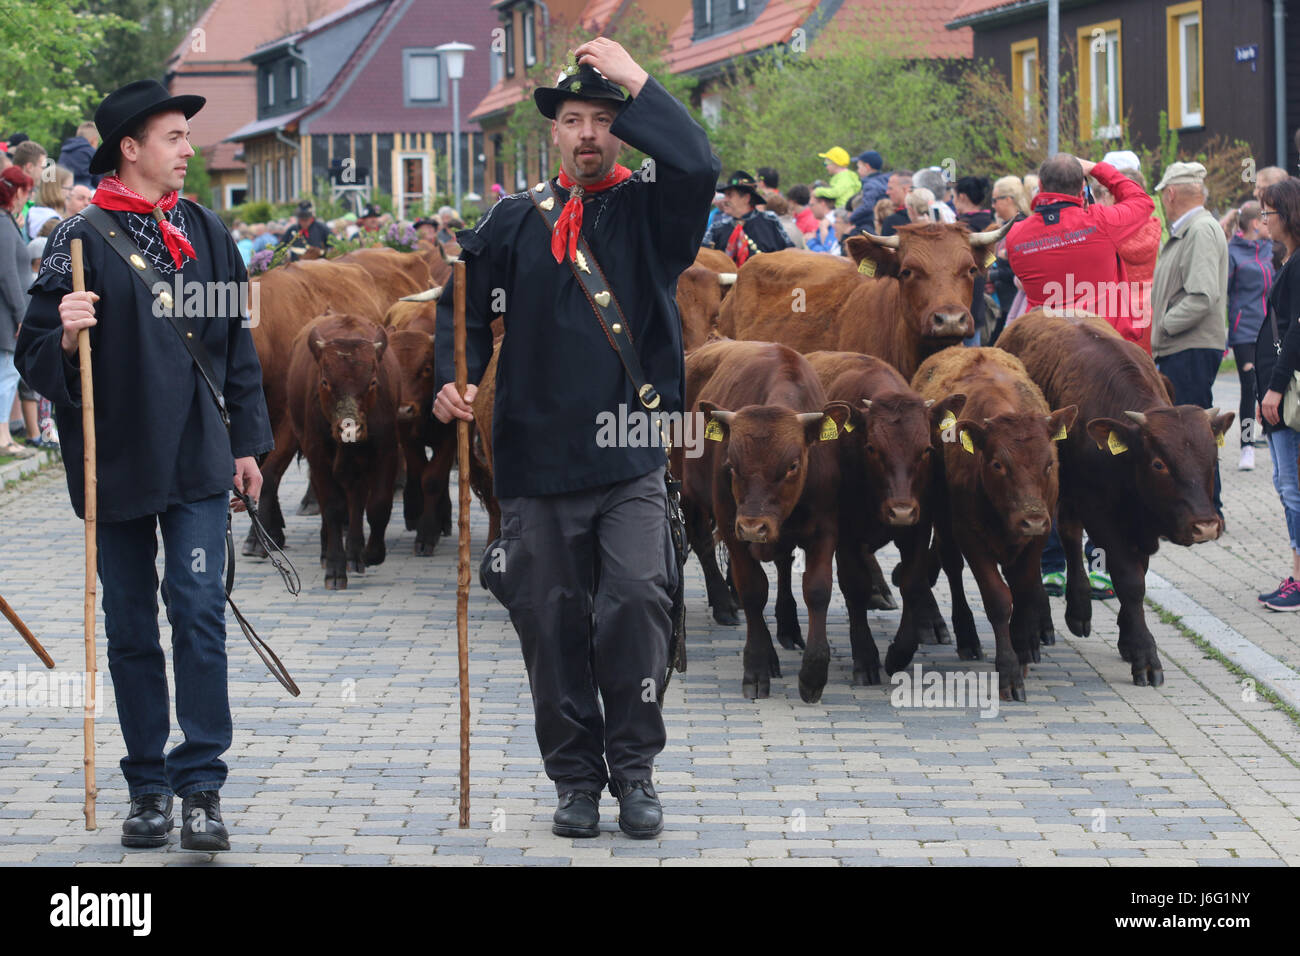 Tanne, Germany. 21st May, 2017. Cow herders march through the town along with their festively attired cows during the traditional Cow Prom in Tanne, Germany, 21 May 2017. The Cow Prom took place under a sunny weather and with many spectators in the small town of Tanne in the Harz mountains. More than 20 cows with colourful head-dresses executed on Sunday a large procession through the town along with their owners. Photo: Matthias Bein/dpa-Zentralbild/dpa/Alamy Live News Stock Photo